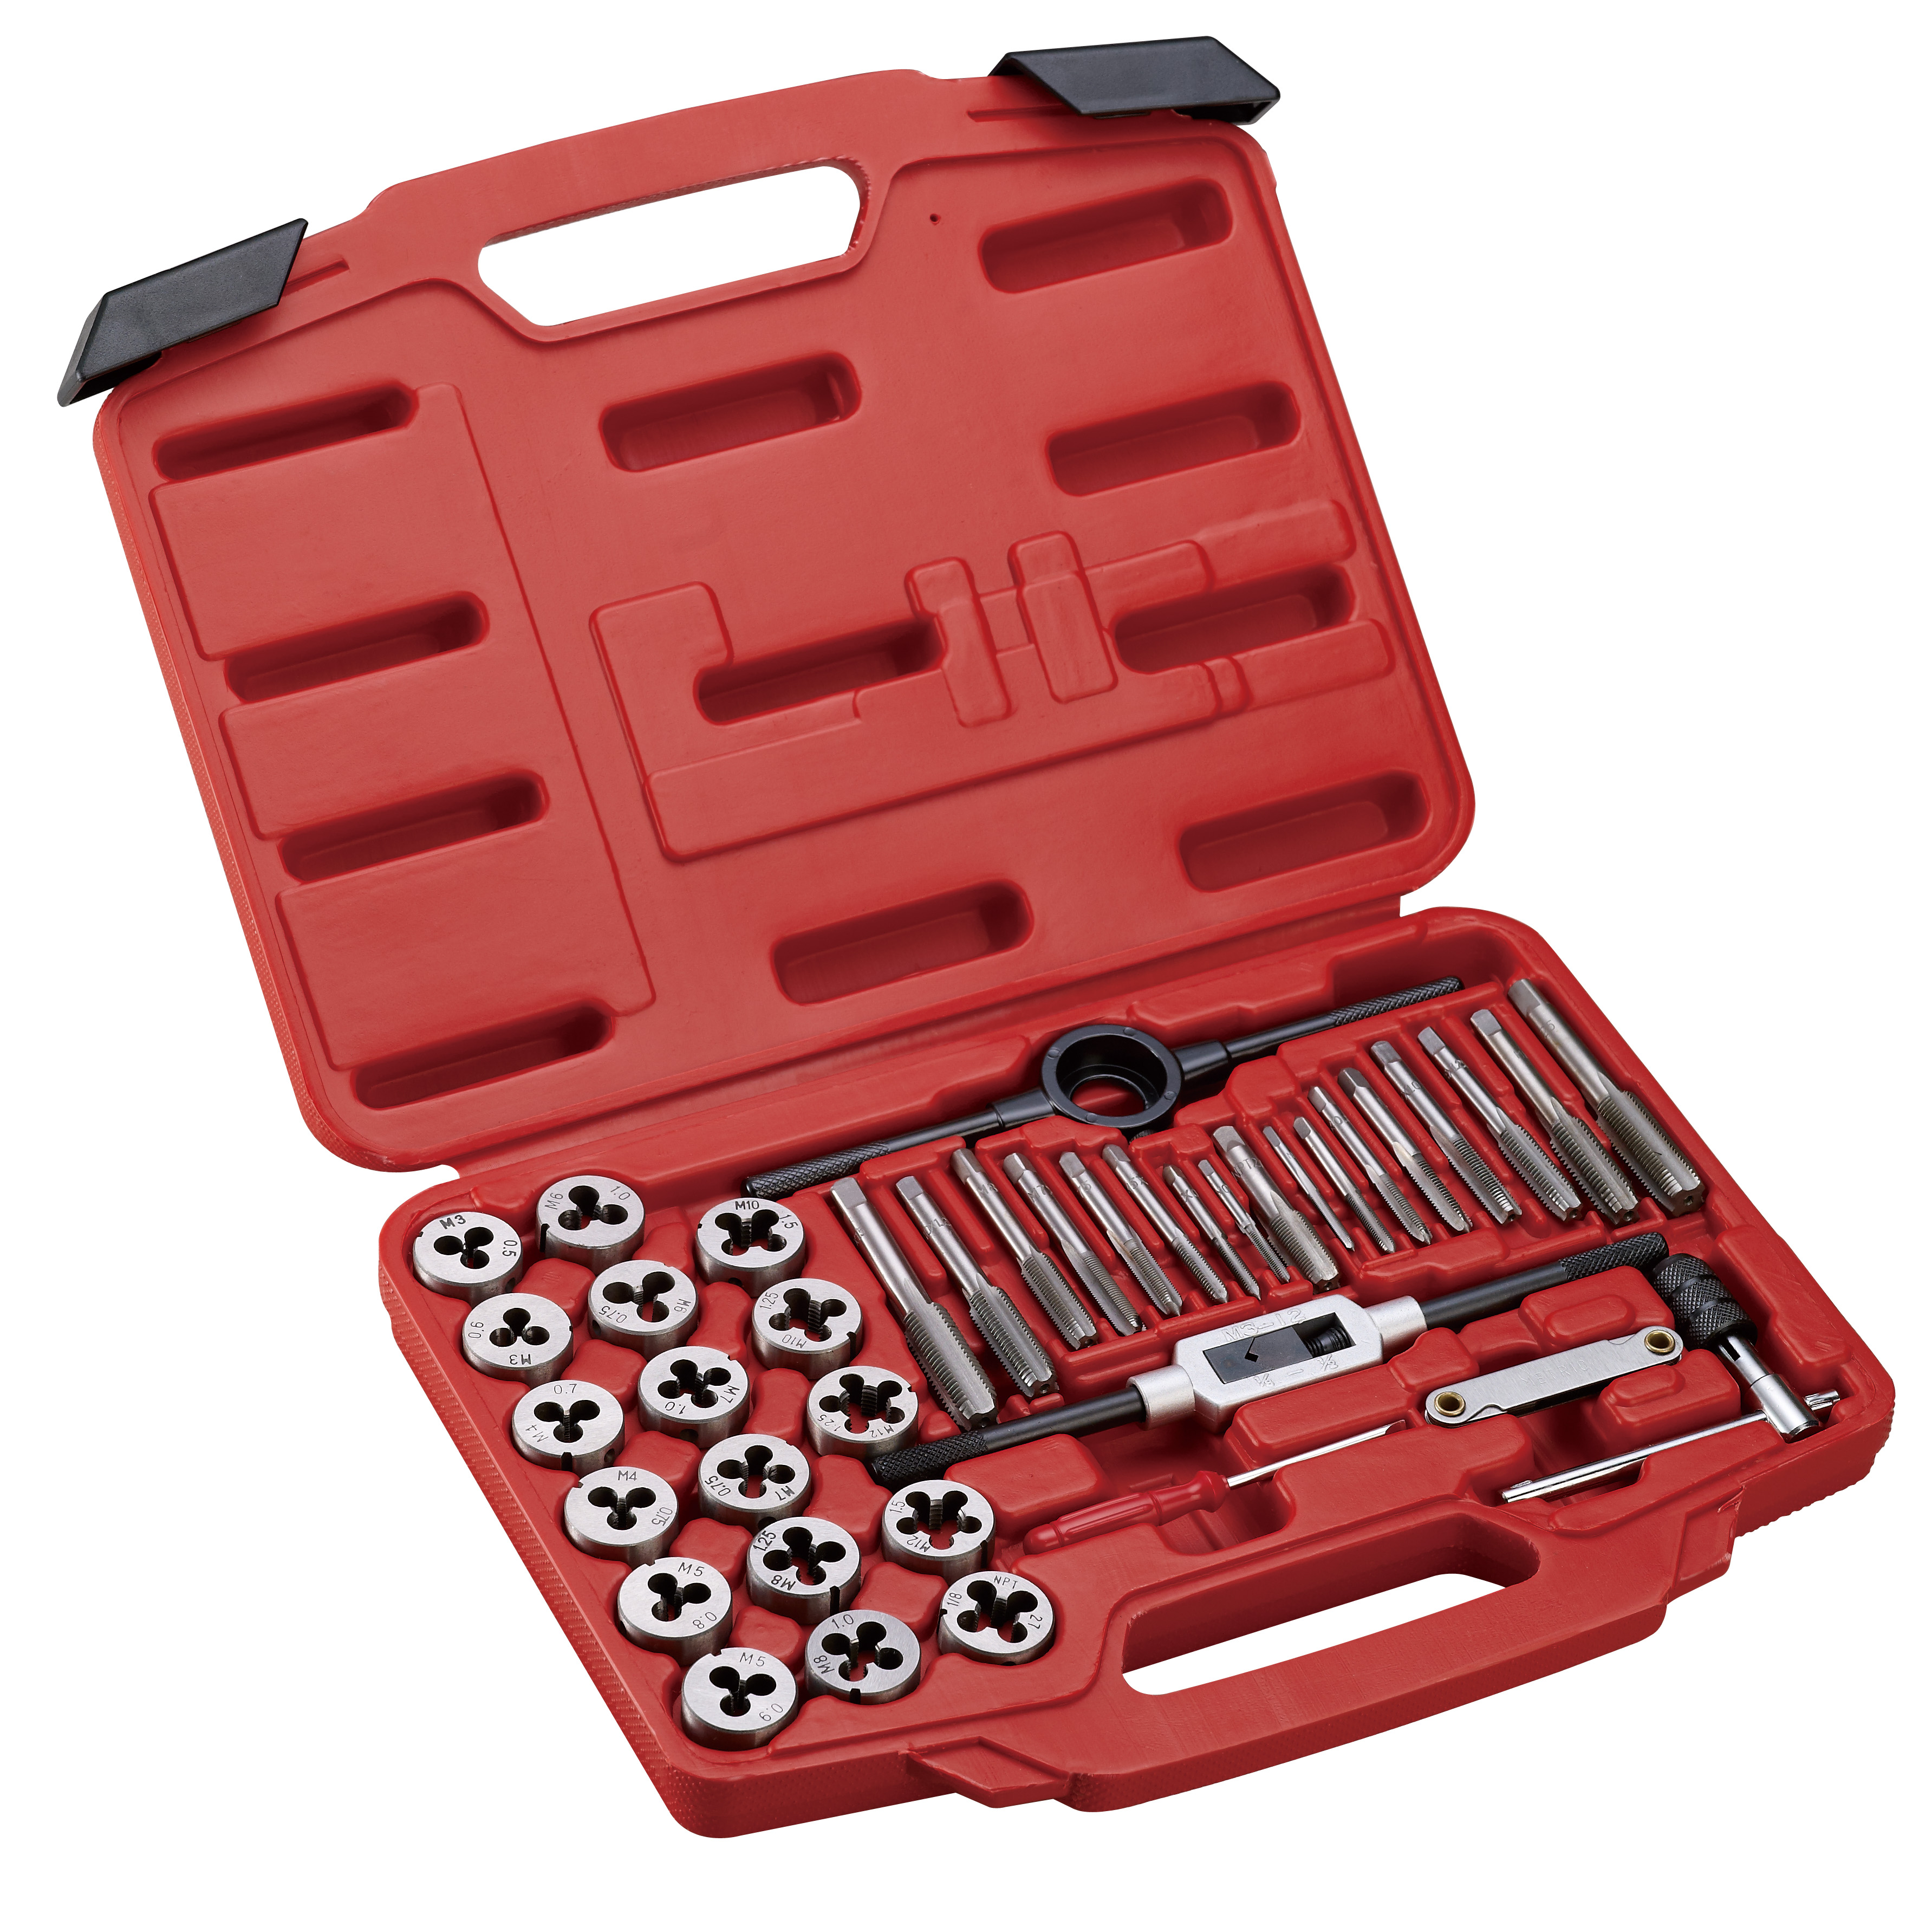 40PC TAP AND DIE SET (METRIC SIZE)